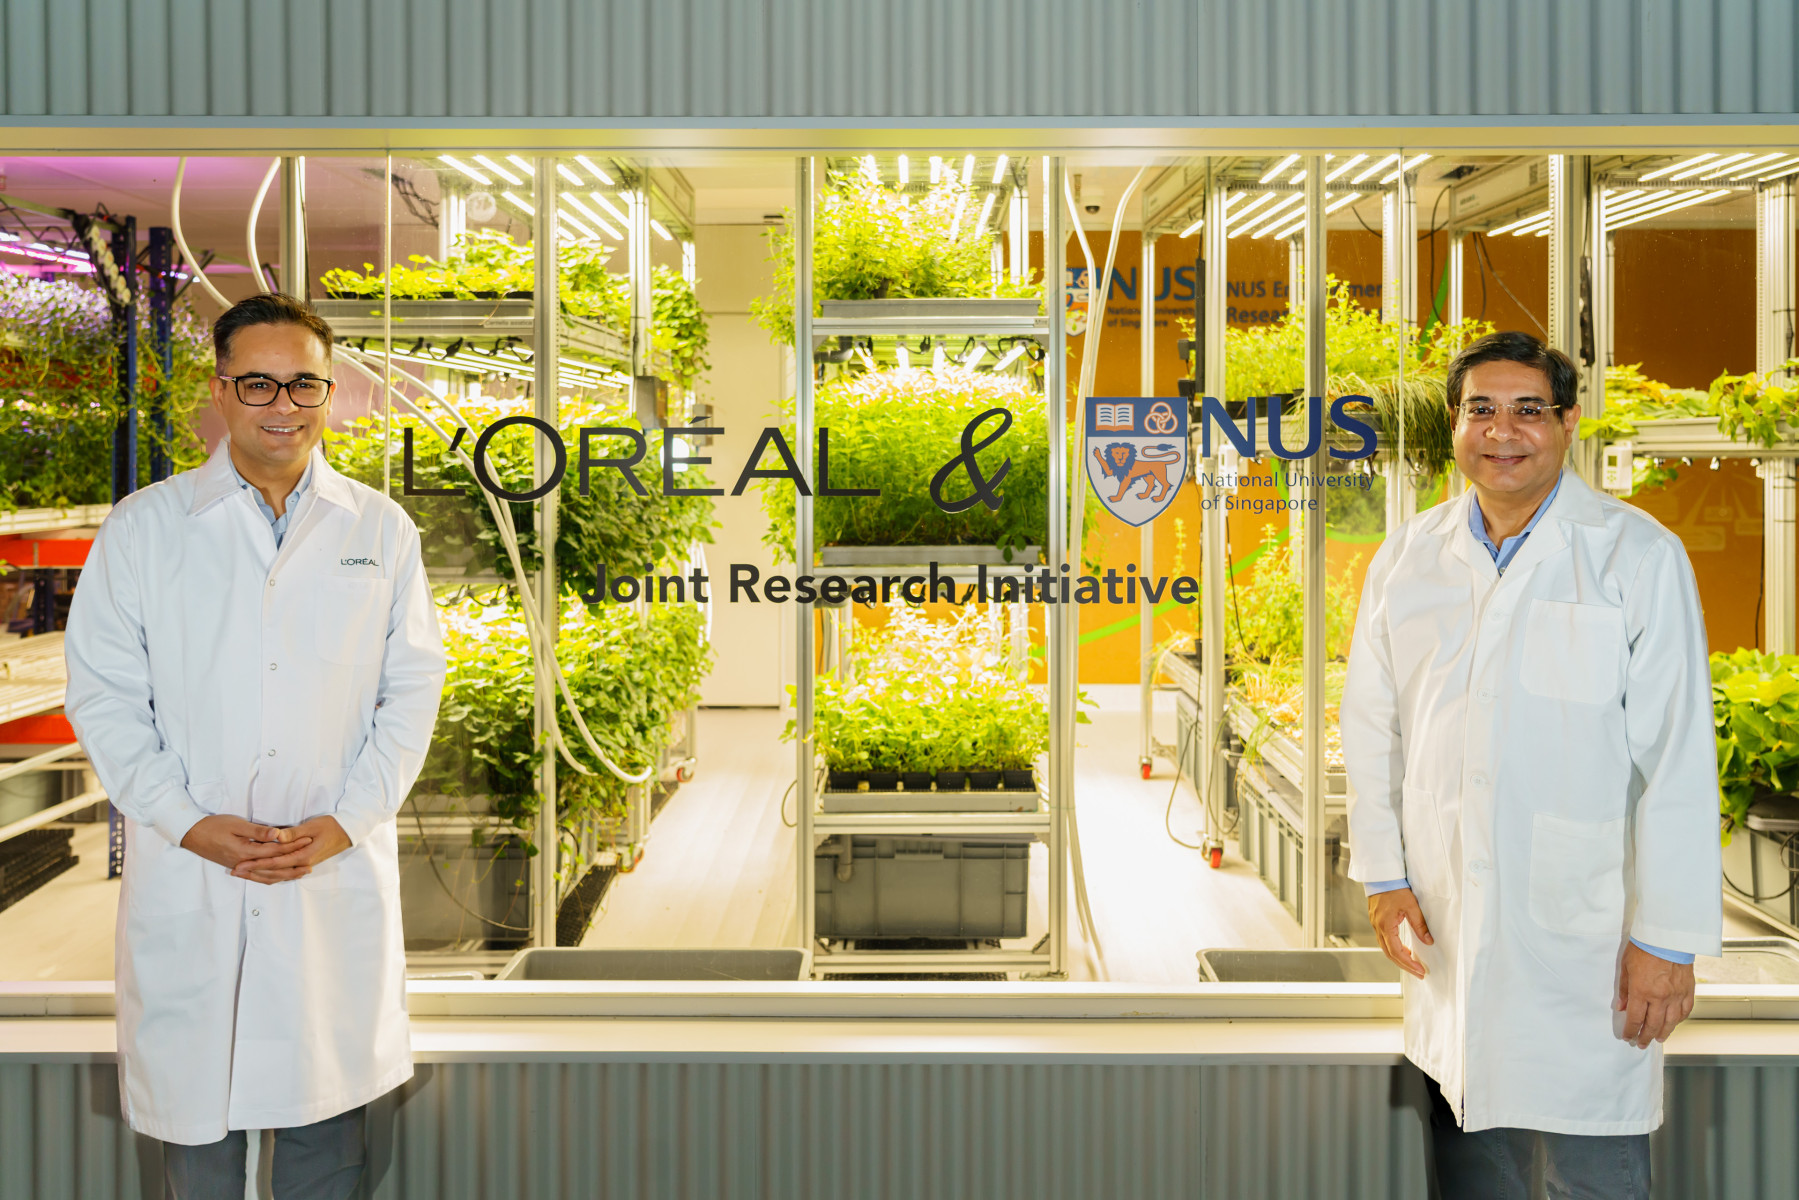 Assoc Prof Sanjay Swarup (right), Director of NUS Environmental Research Institute, and Dr Tarun Chopra (left), Director of Advanced Research, L’Oréal Singapore Research & Innovation, at the new grow zone in NUS Agritech Centre where scientists will study the use of beneficial soil microbes to increase the yields of commercially important crops in a climate-controlled environment. (Photo: L’Oréal Singapore)